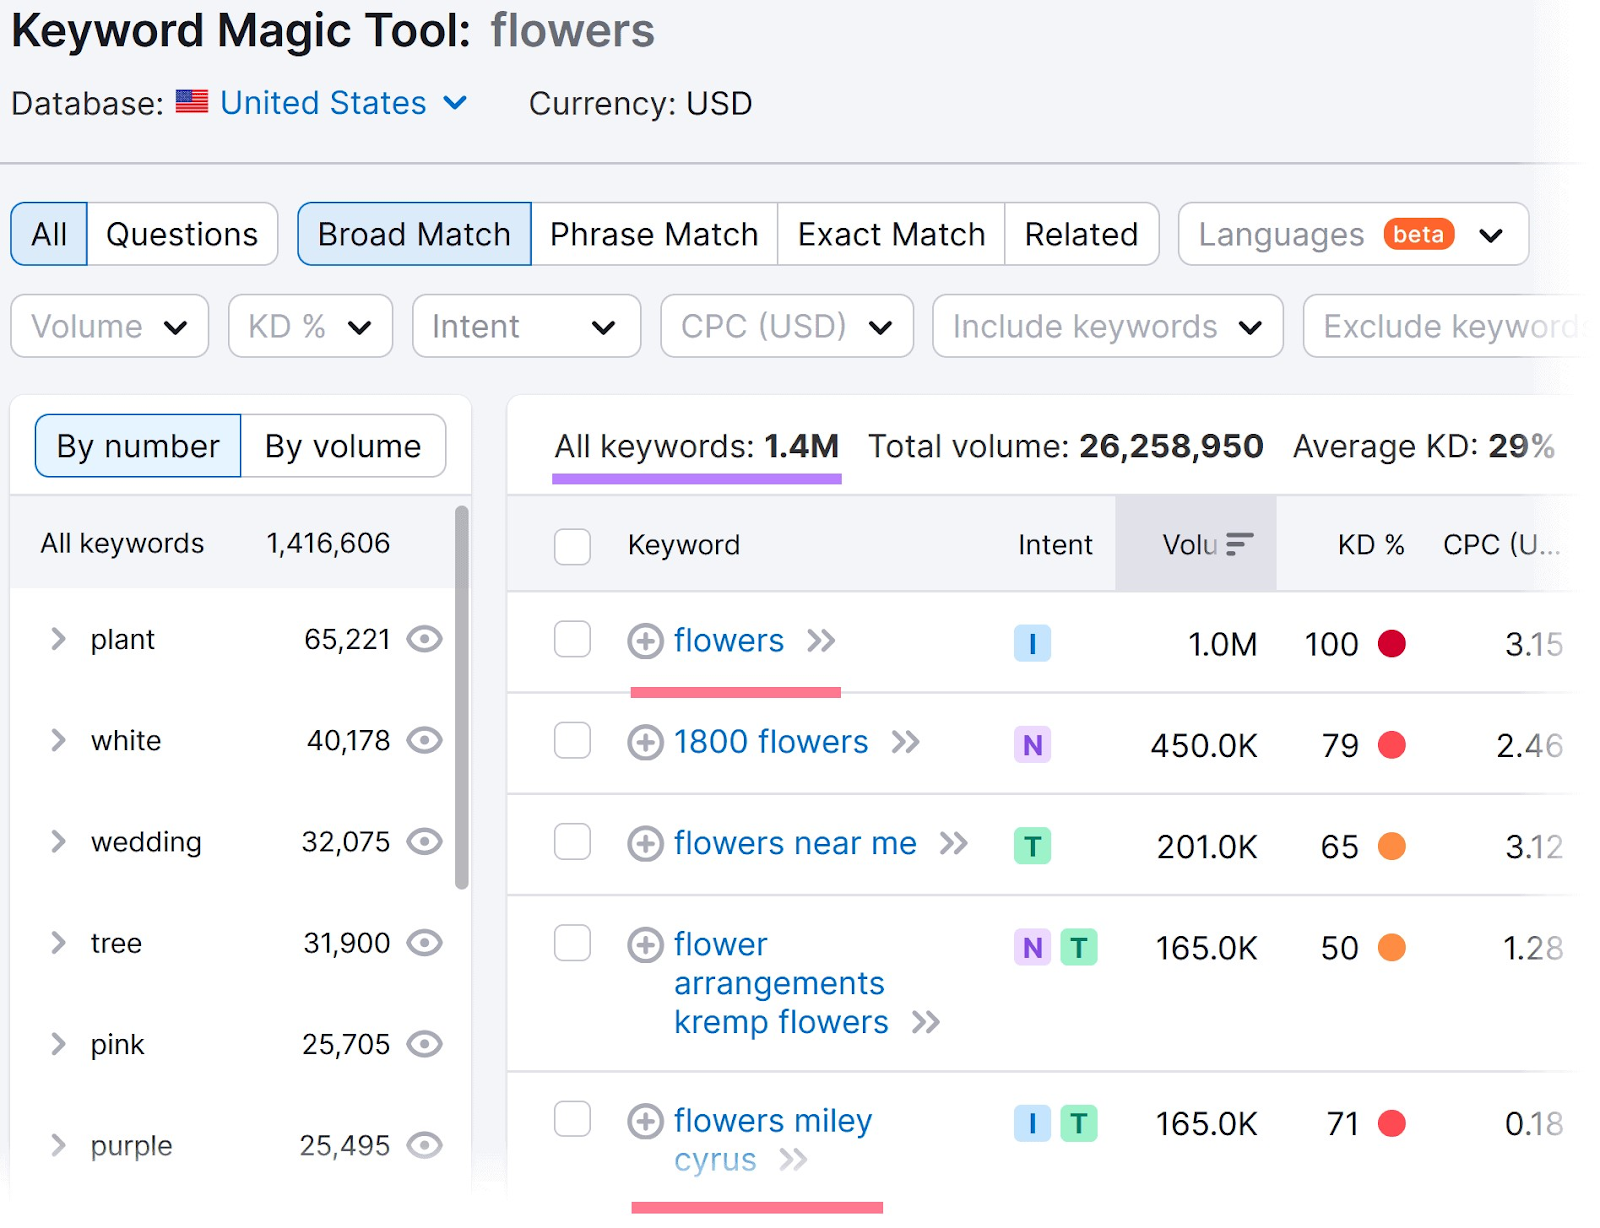 Keyword Magic Tool results for the "flower" search